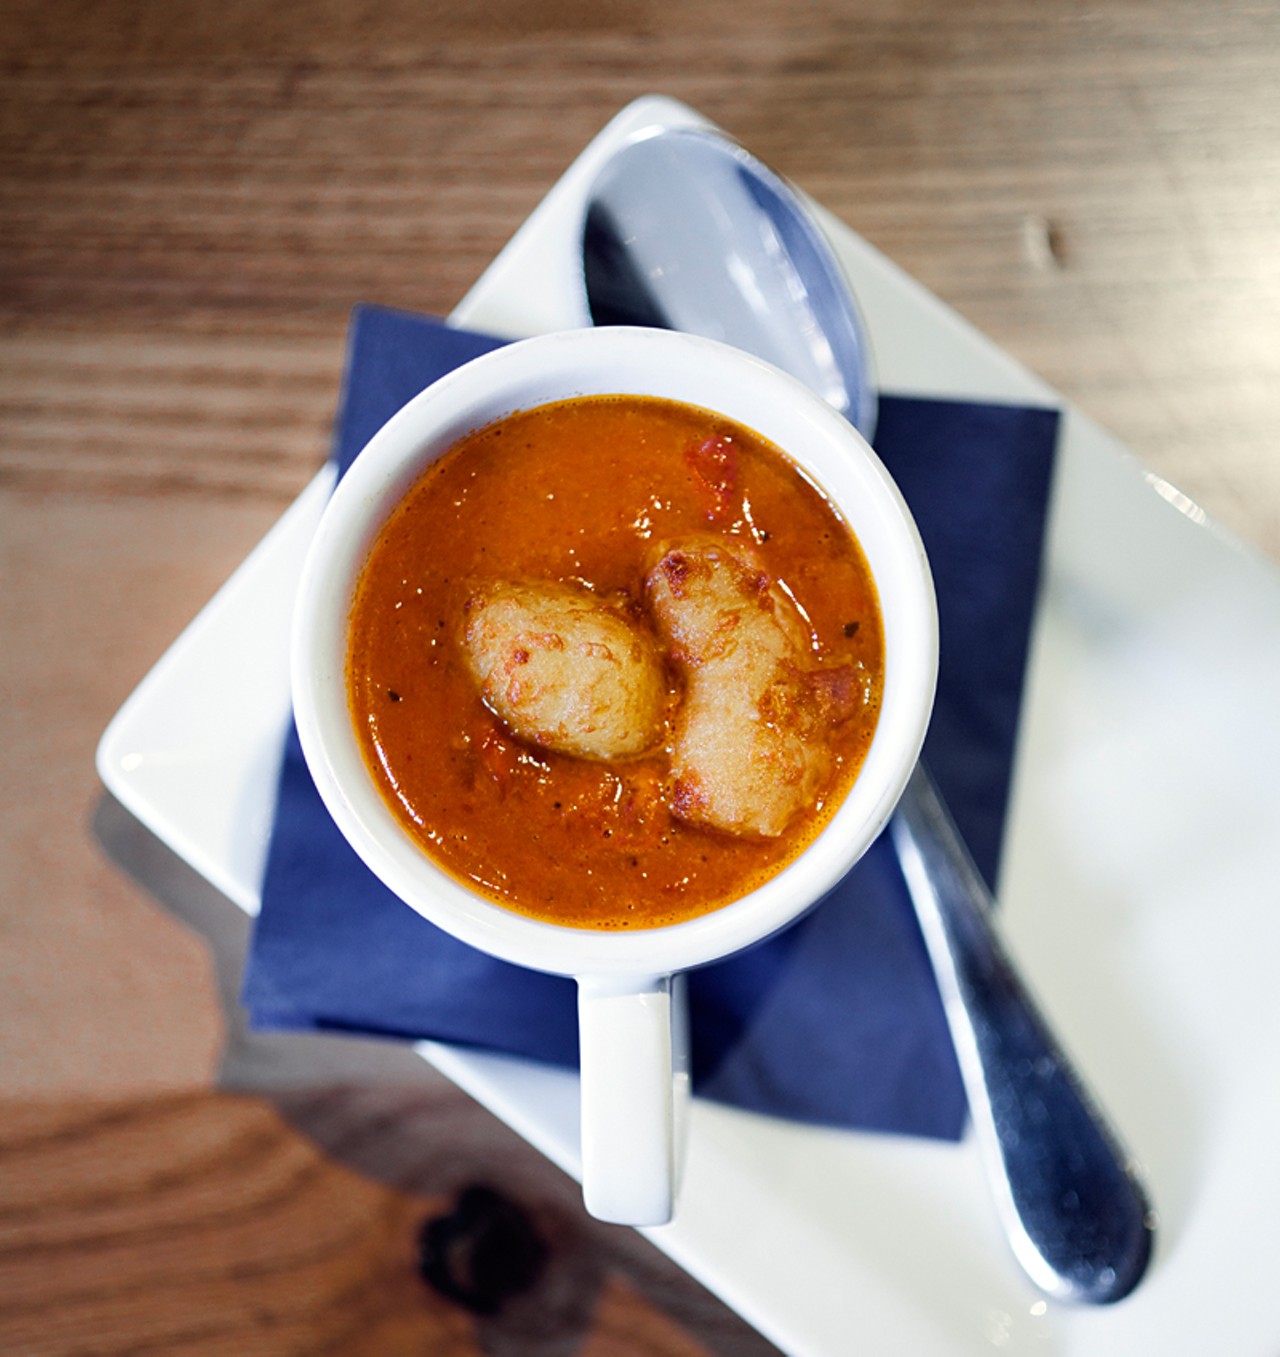 "Roast Tomato Soup" with a side of crispy cheese curds.